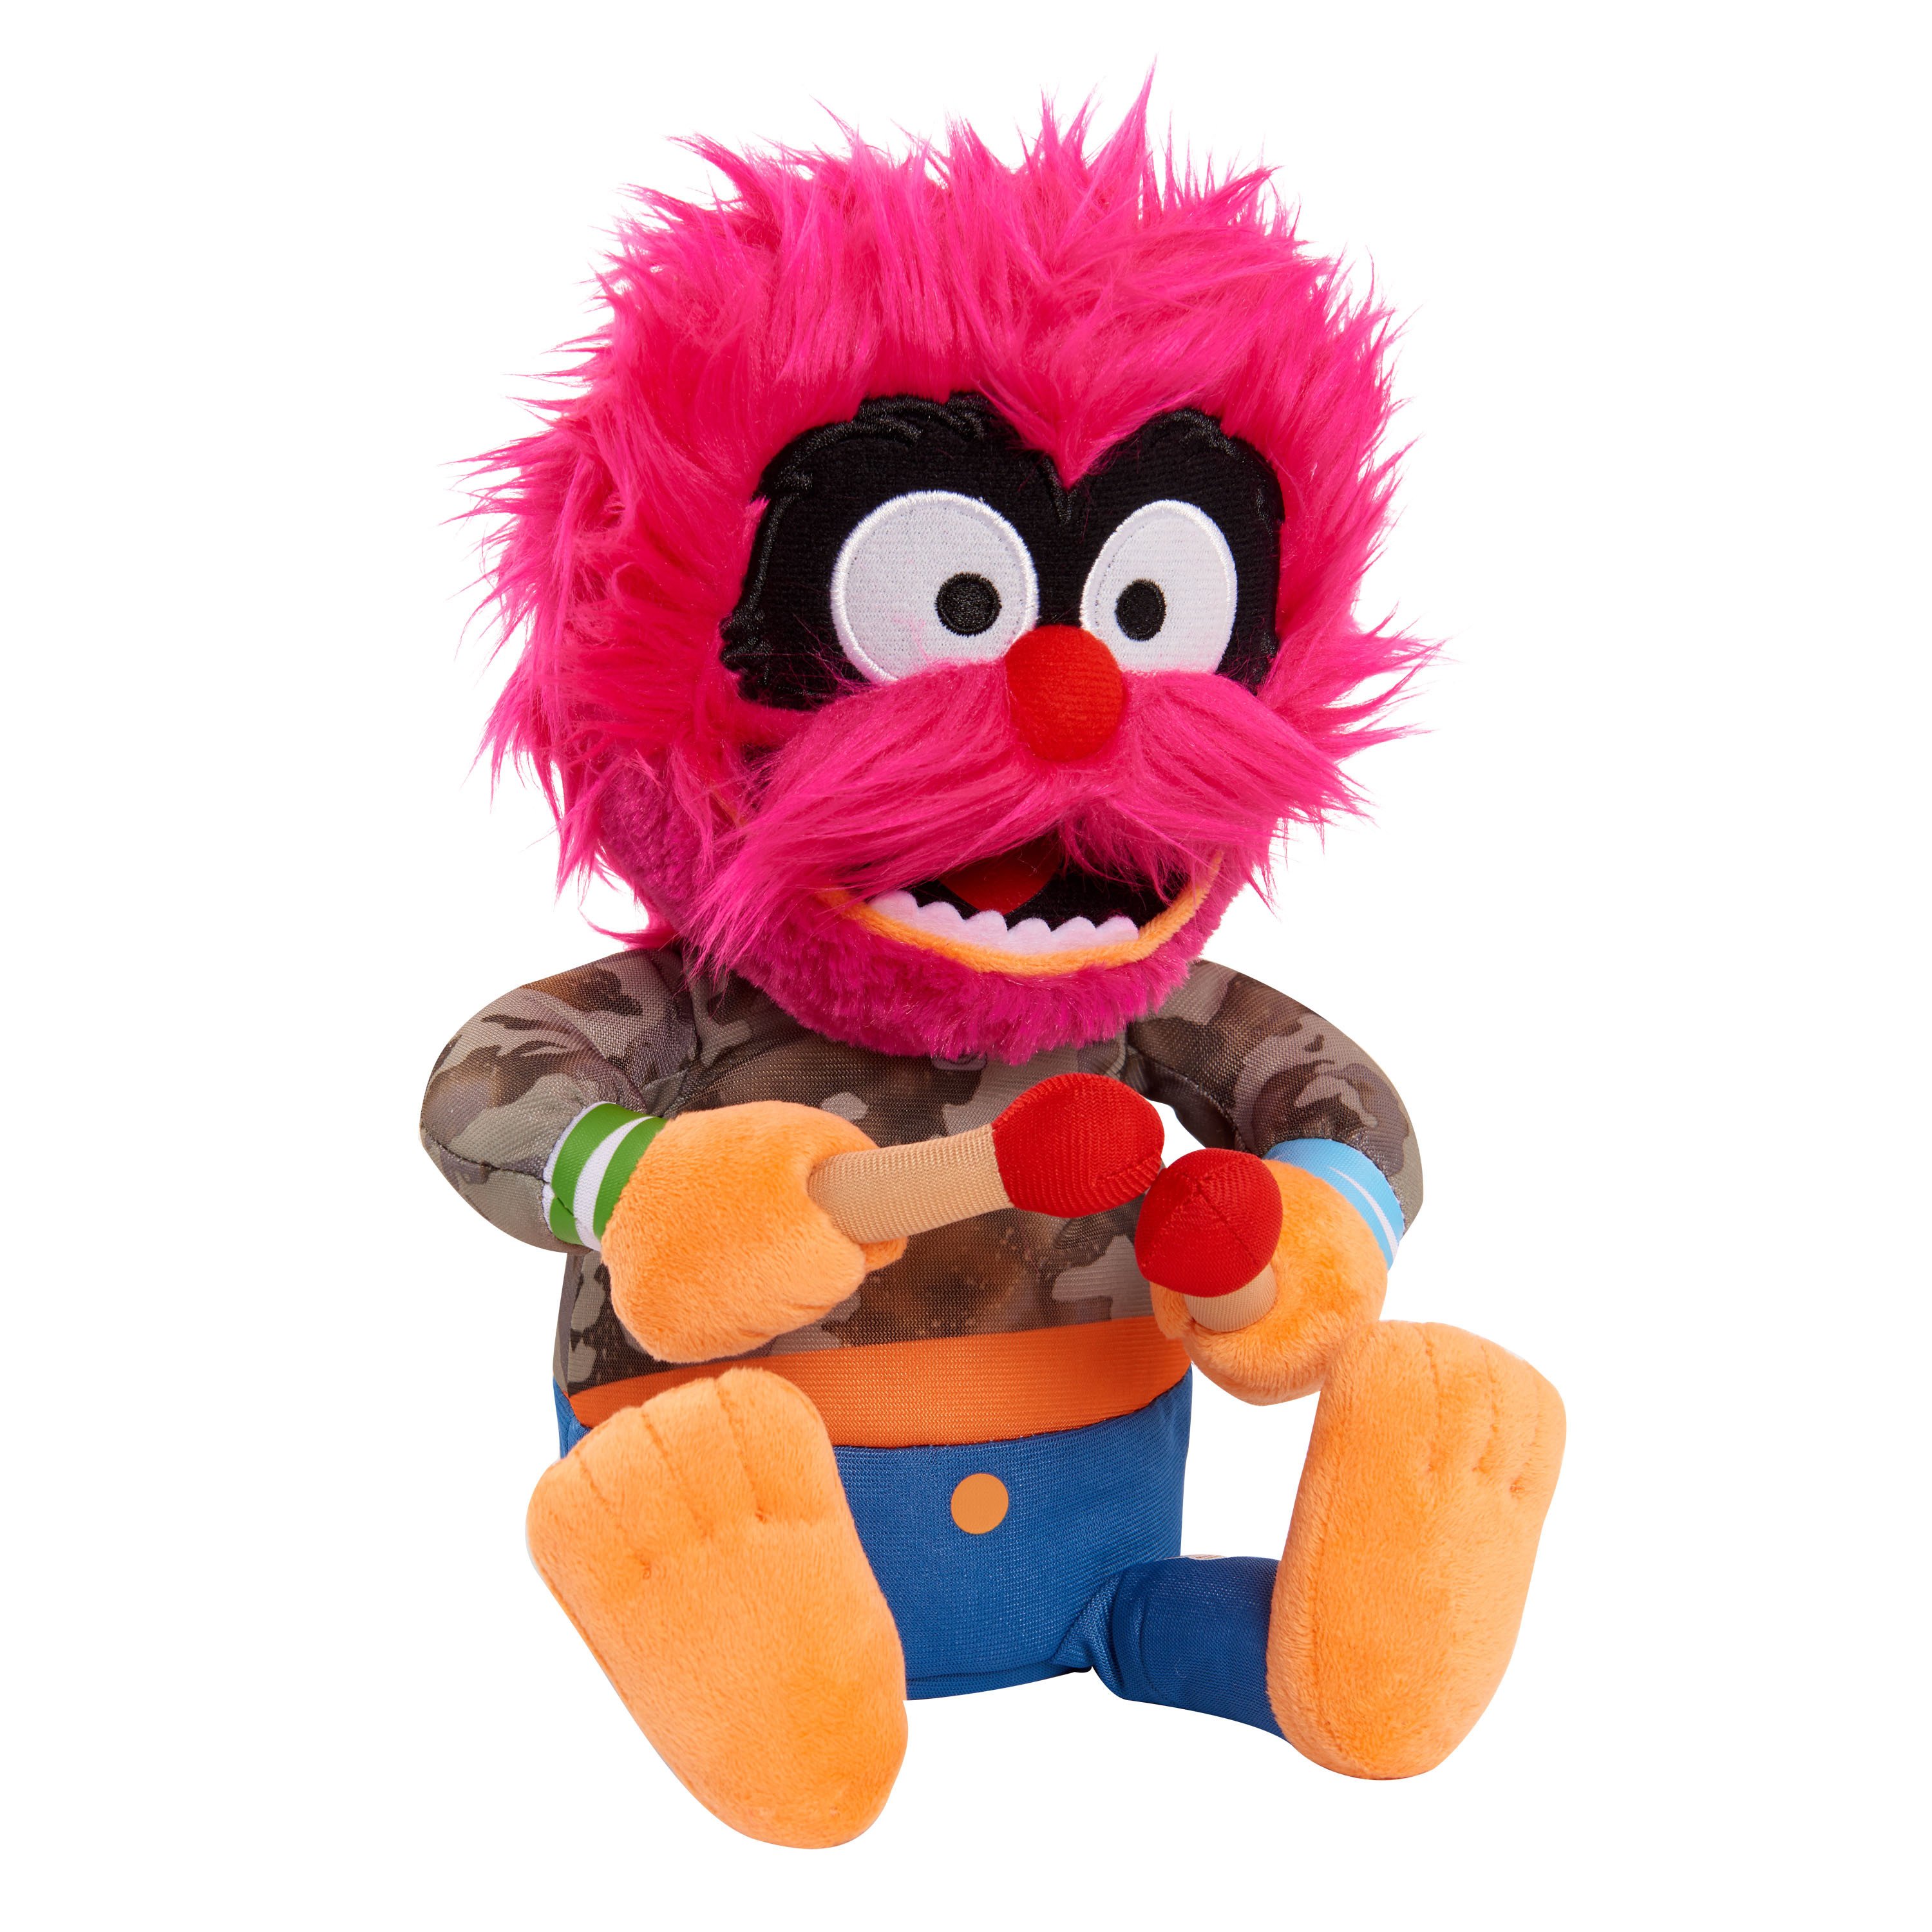 Muppet Babies Rockin' Animal Animated Plush, Officially Licensed Kids Toys for Ages 3 Up, Gifts and Presents - image 3 of 3